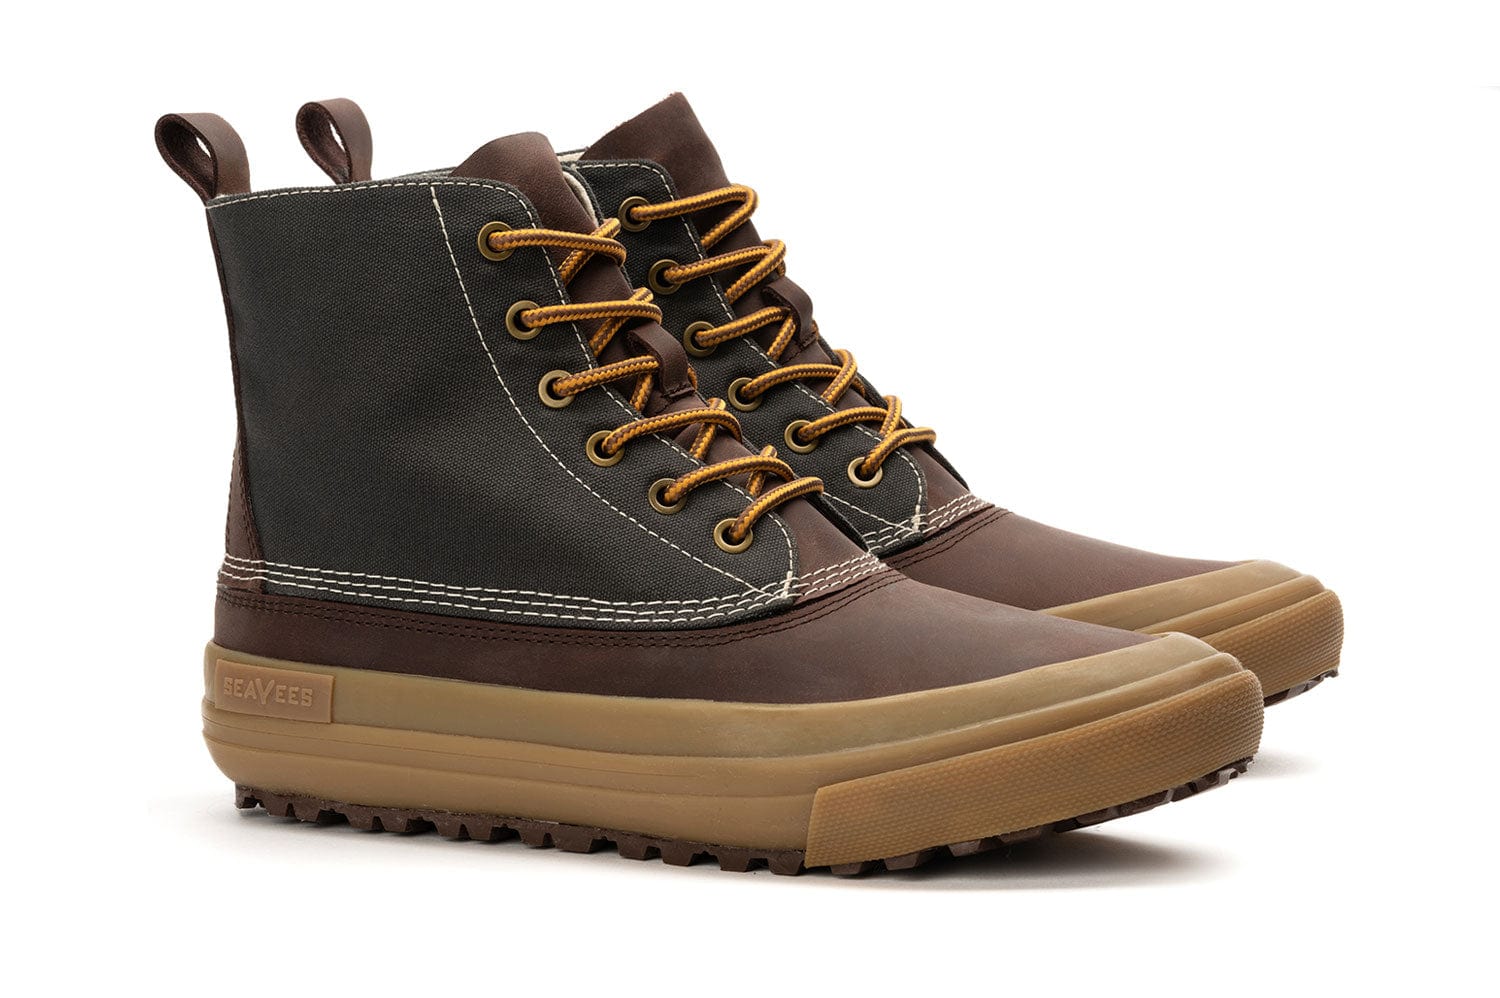 Angled view of Hickory/Charcoal Cascade Range Boots showing off the high-top style and sturdy brown soles.